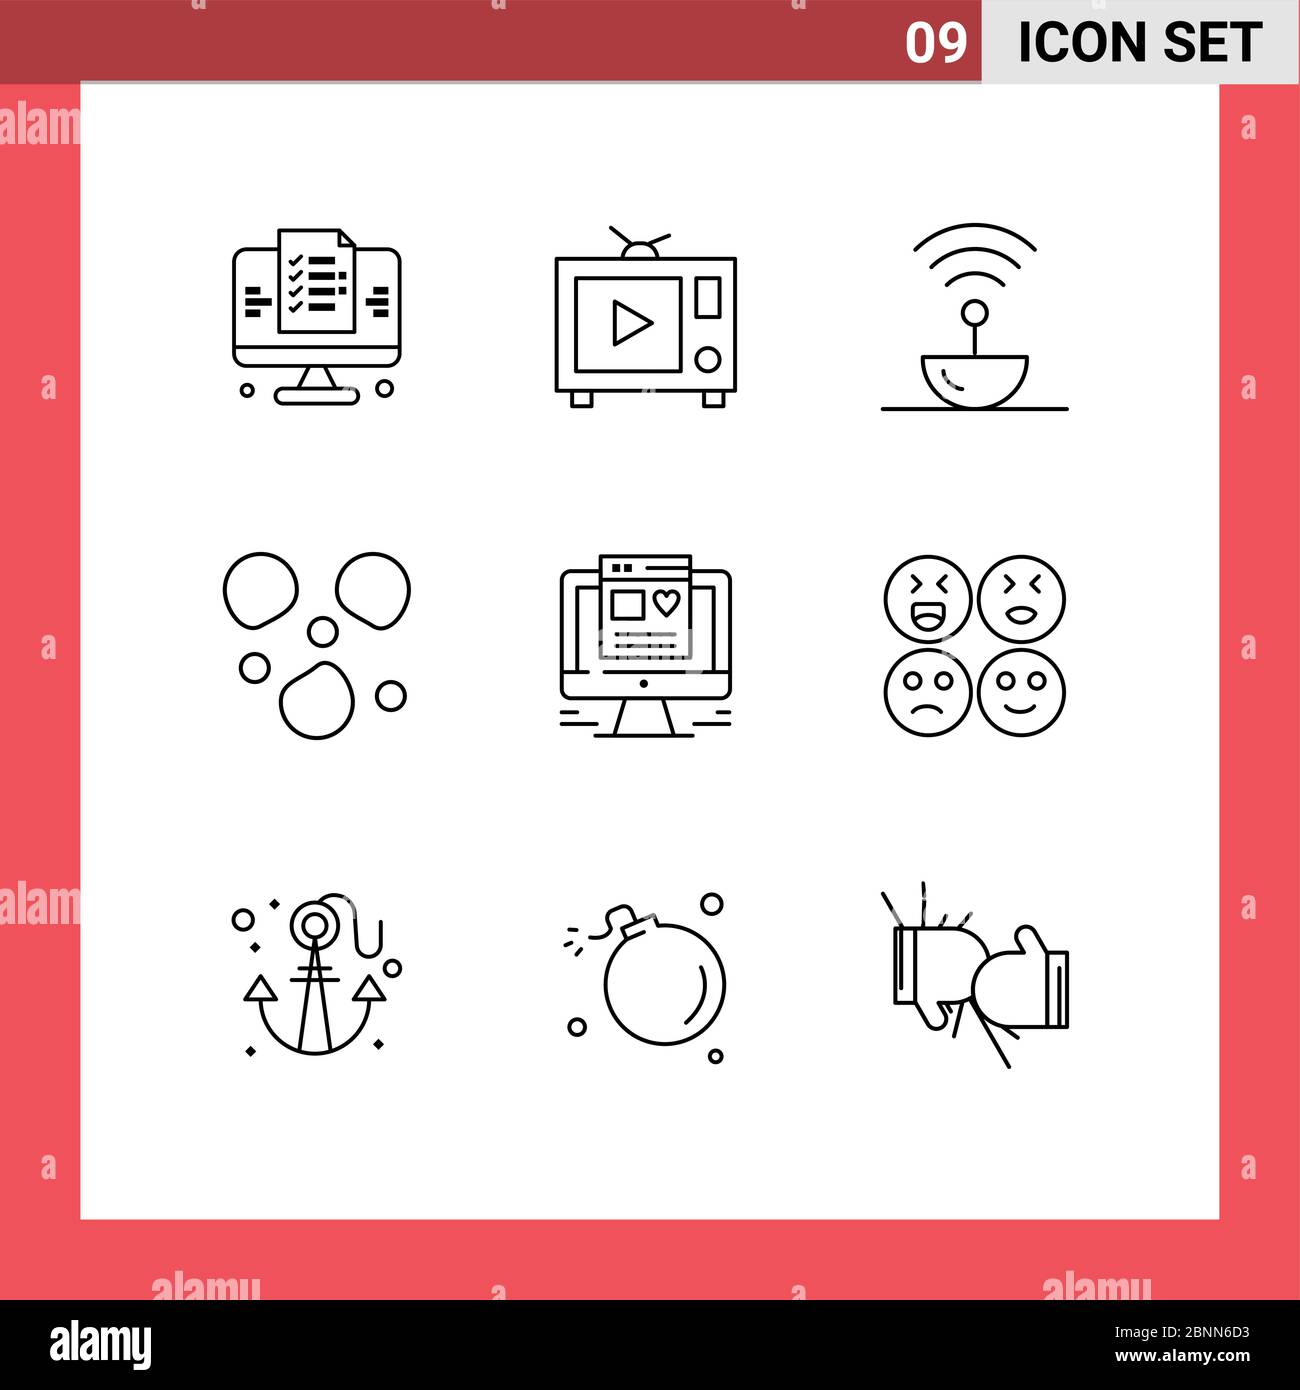 Set of 9 Modern UI Icons Symbols Signs for web design, computer, steel, weather, hail Editable Vector Design Elements Stock Vector